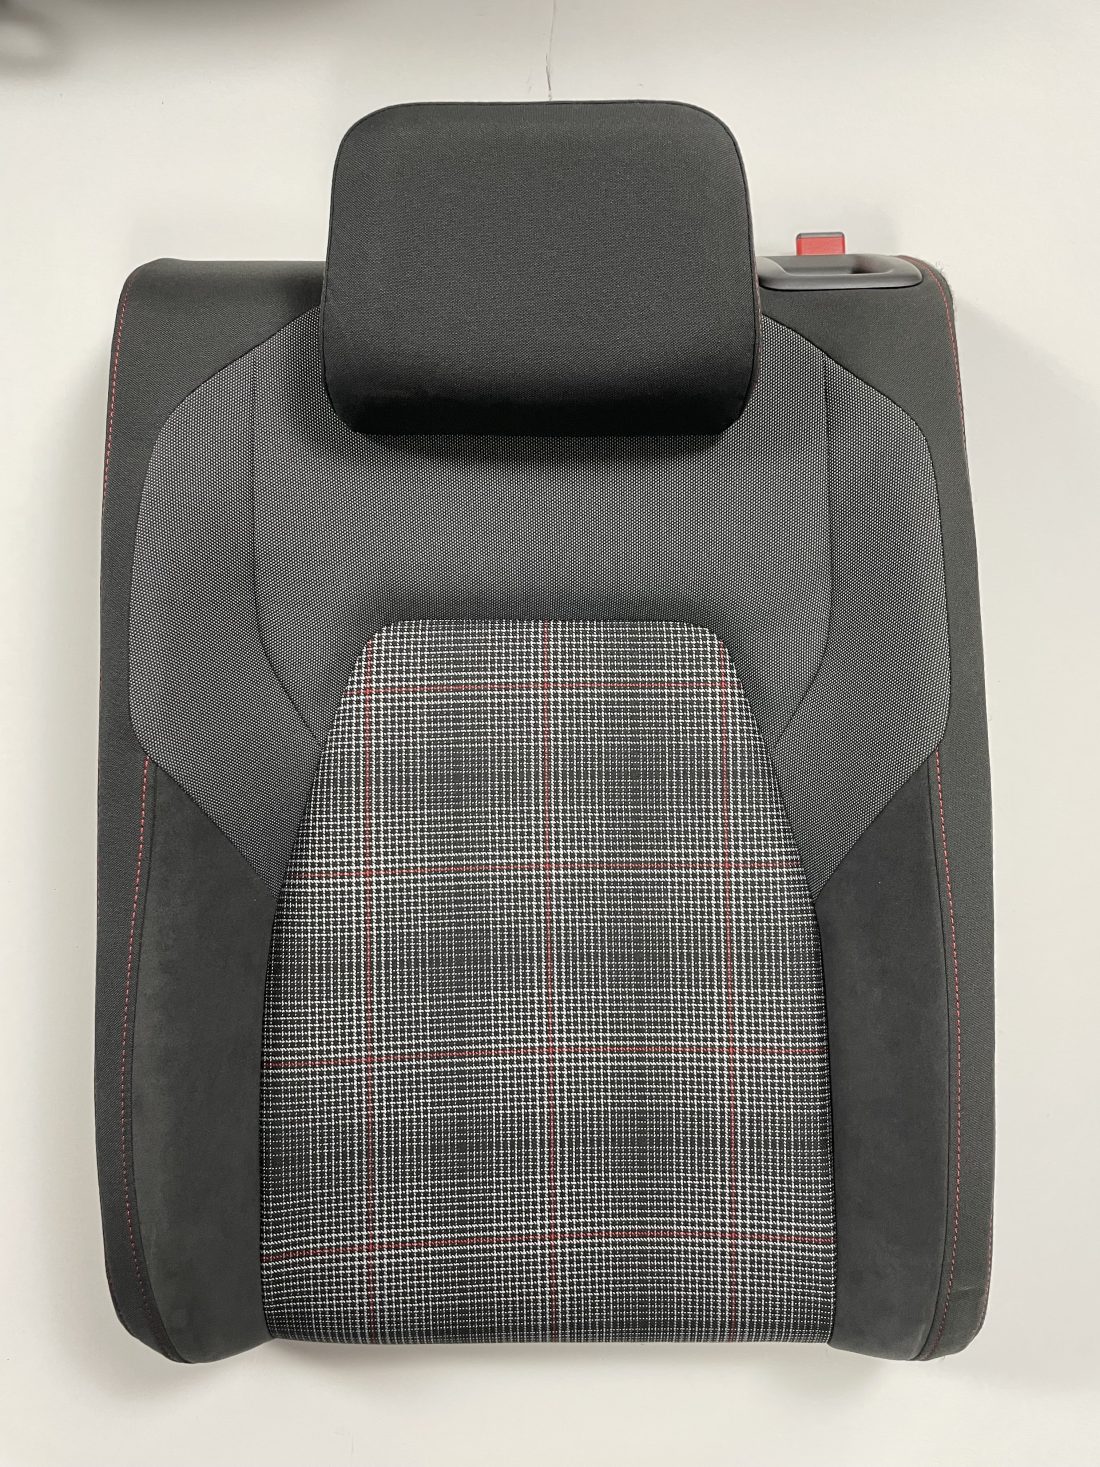 Trp Post Container Data Trp Post Id 6430 Interior Vw Golf 8 Gti Alcantara Fabric Grey Checkered Red White Grey